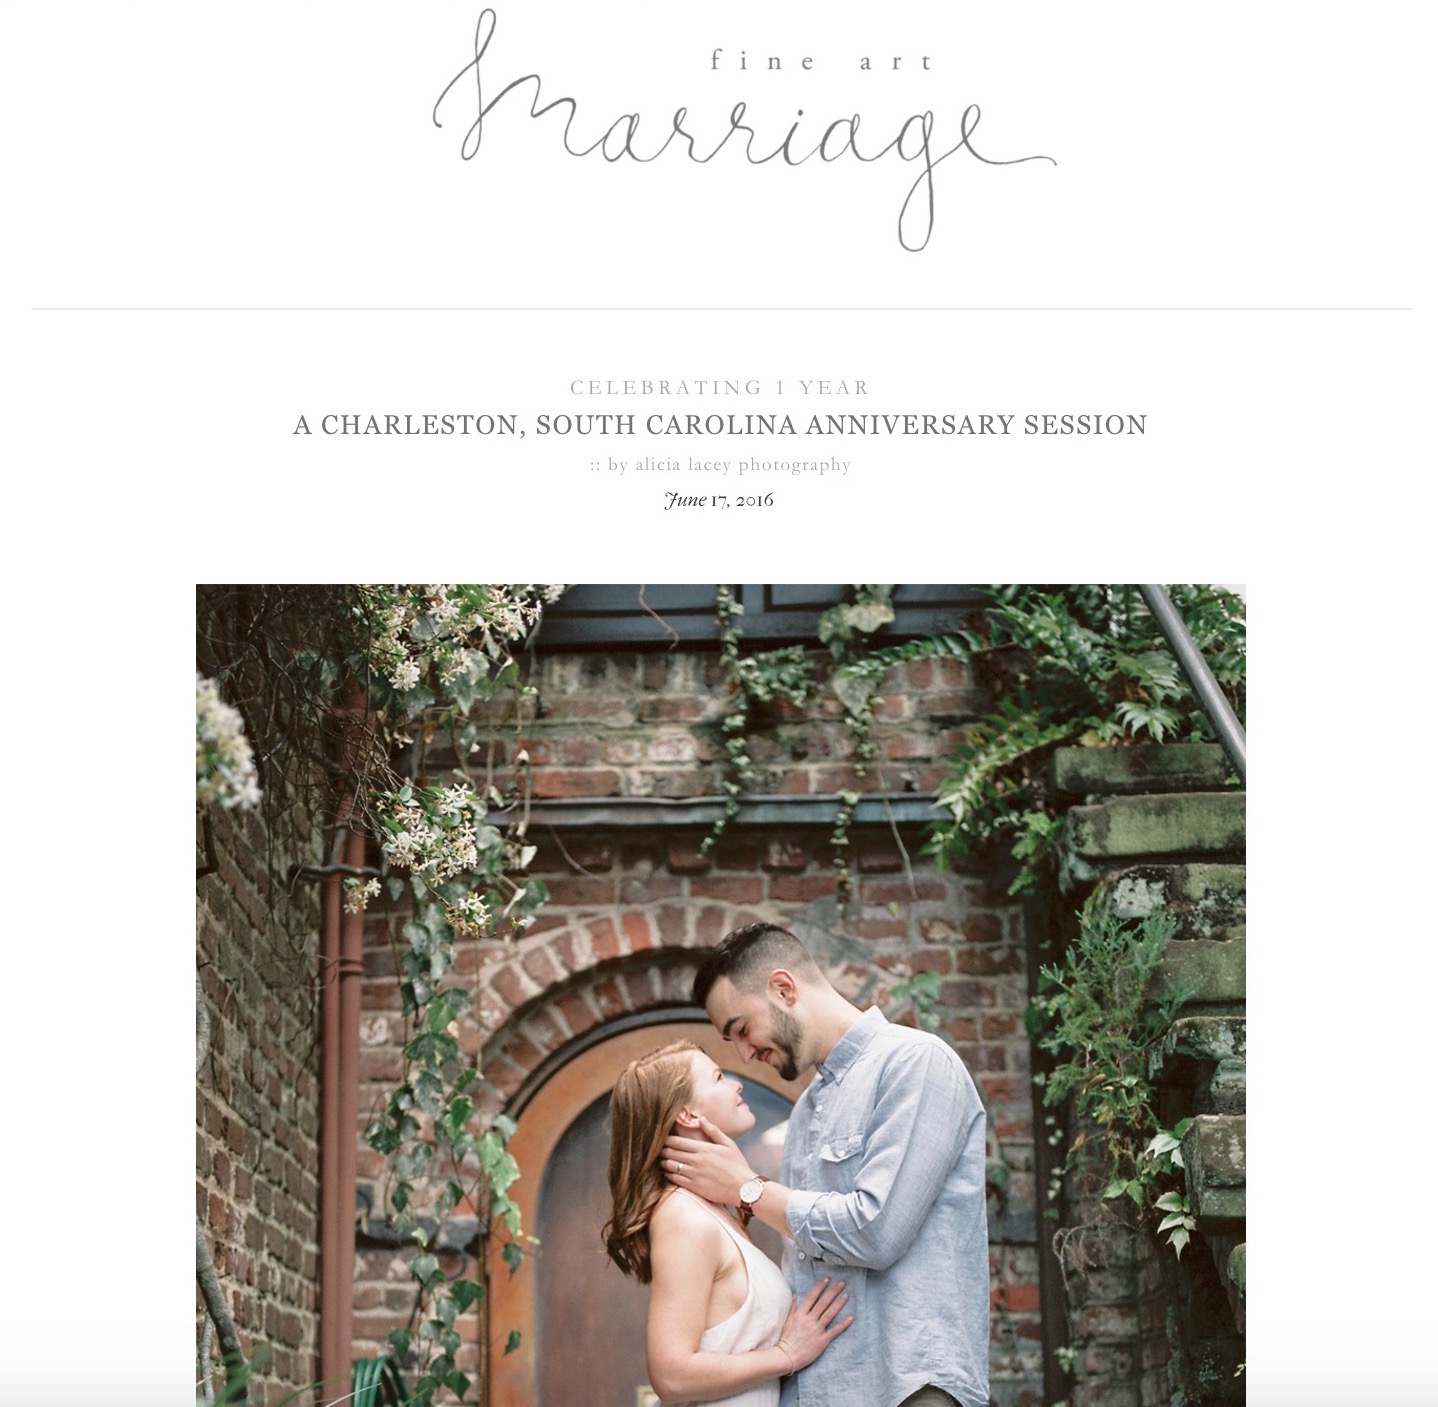 This Charleston, SC downtown anniversary session is published on Fine Art Marriage's blog. Photographed by Washington, DC wedding photographer, Alicia Lacey. 